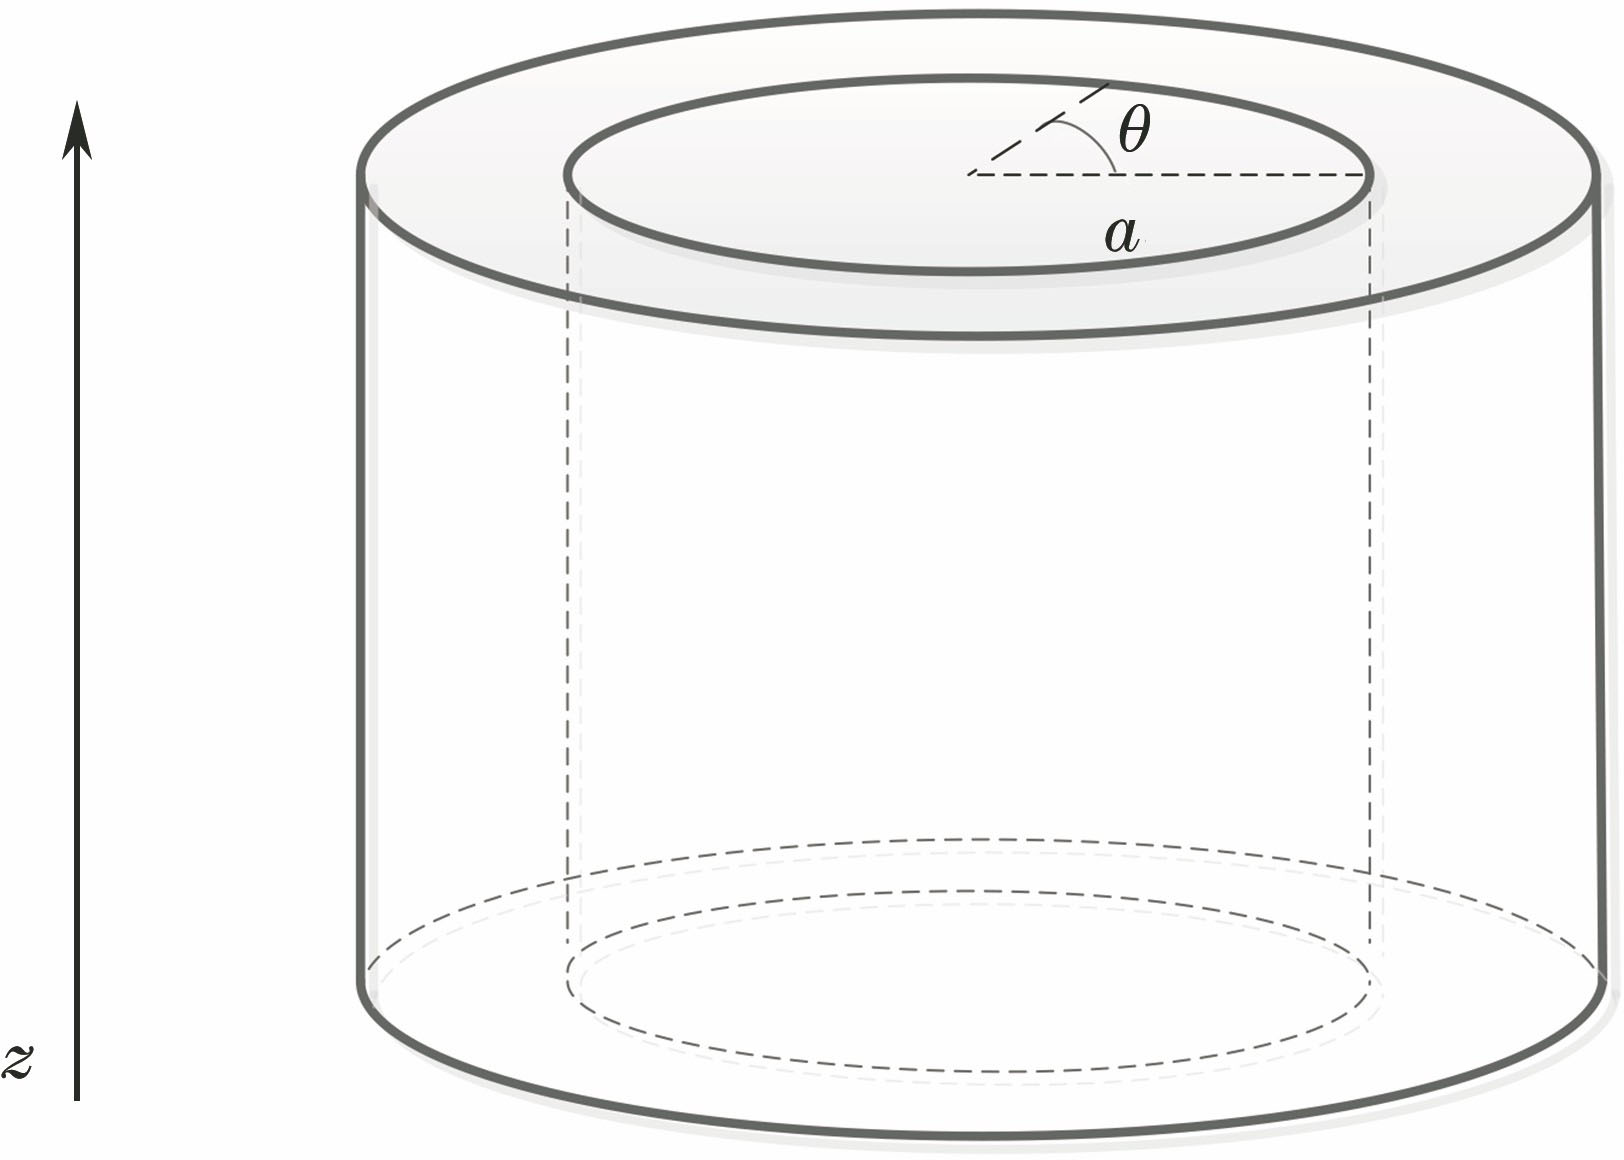 Cylindrical coordinate system of elliptic cylindrical fiber coil